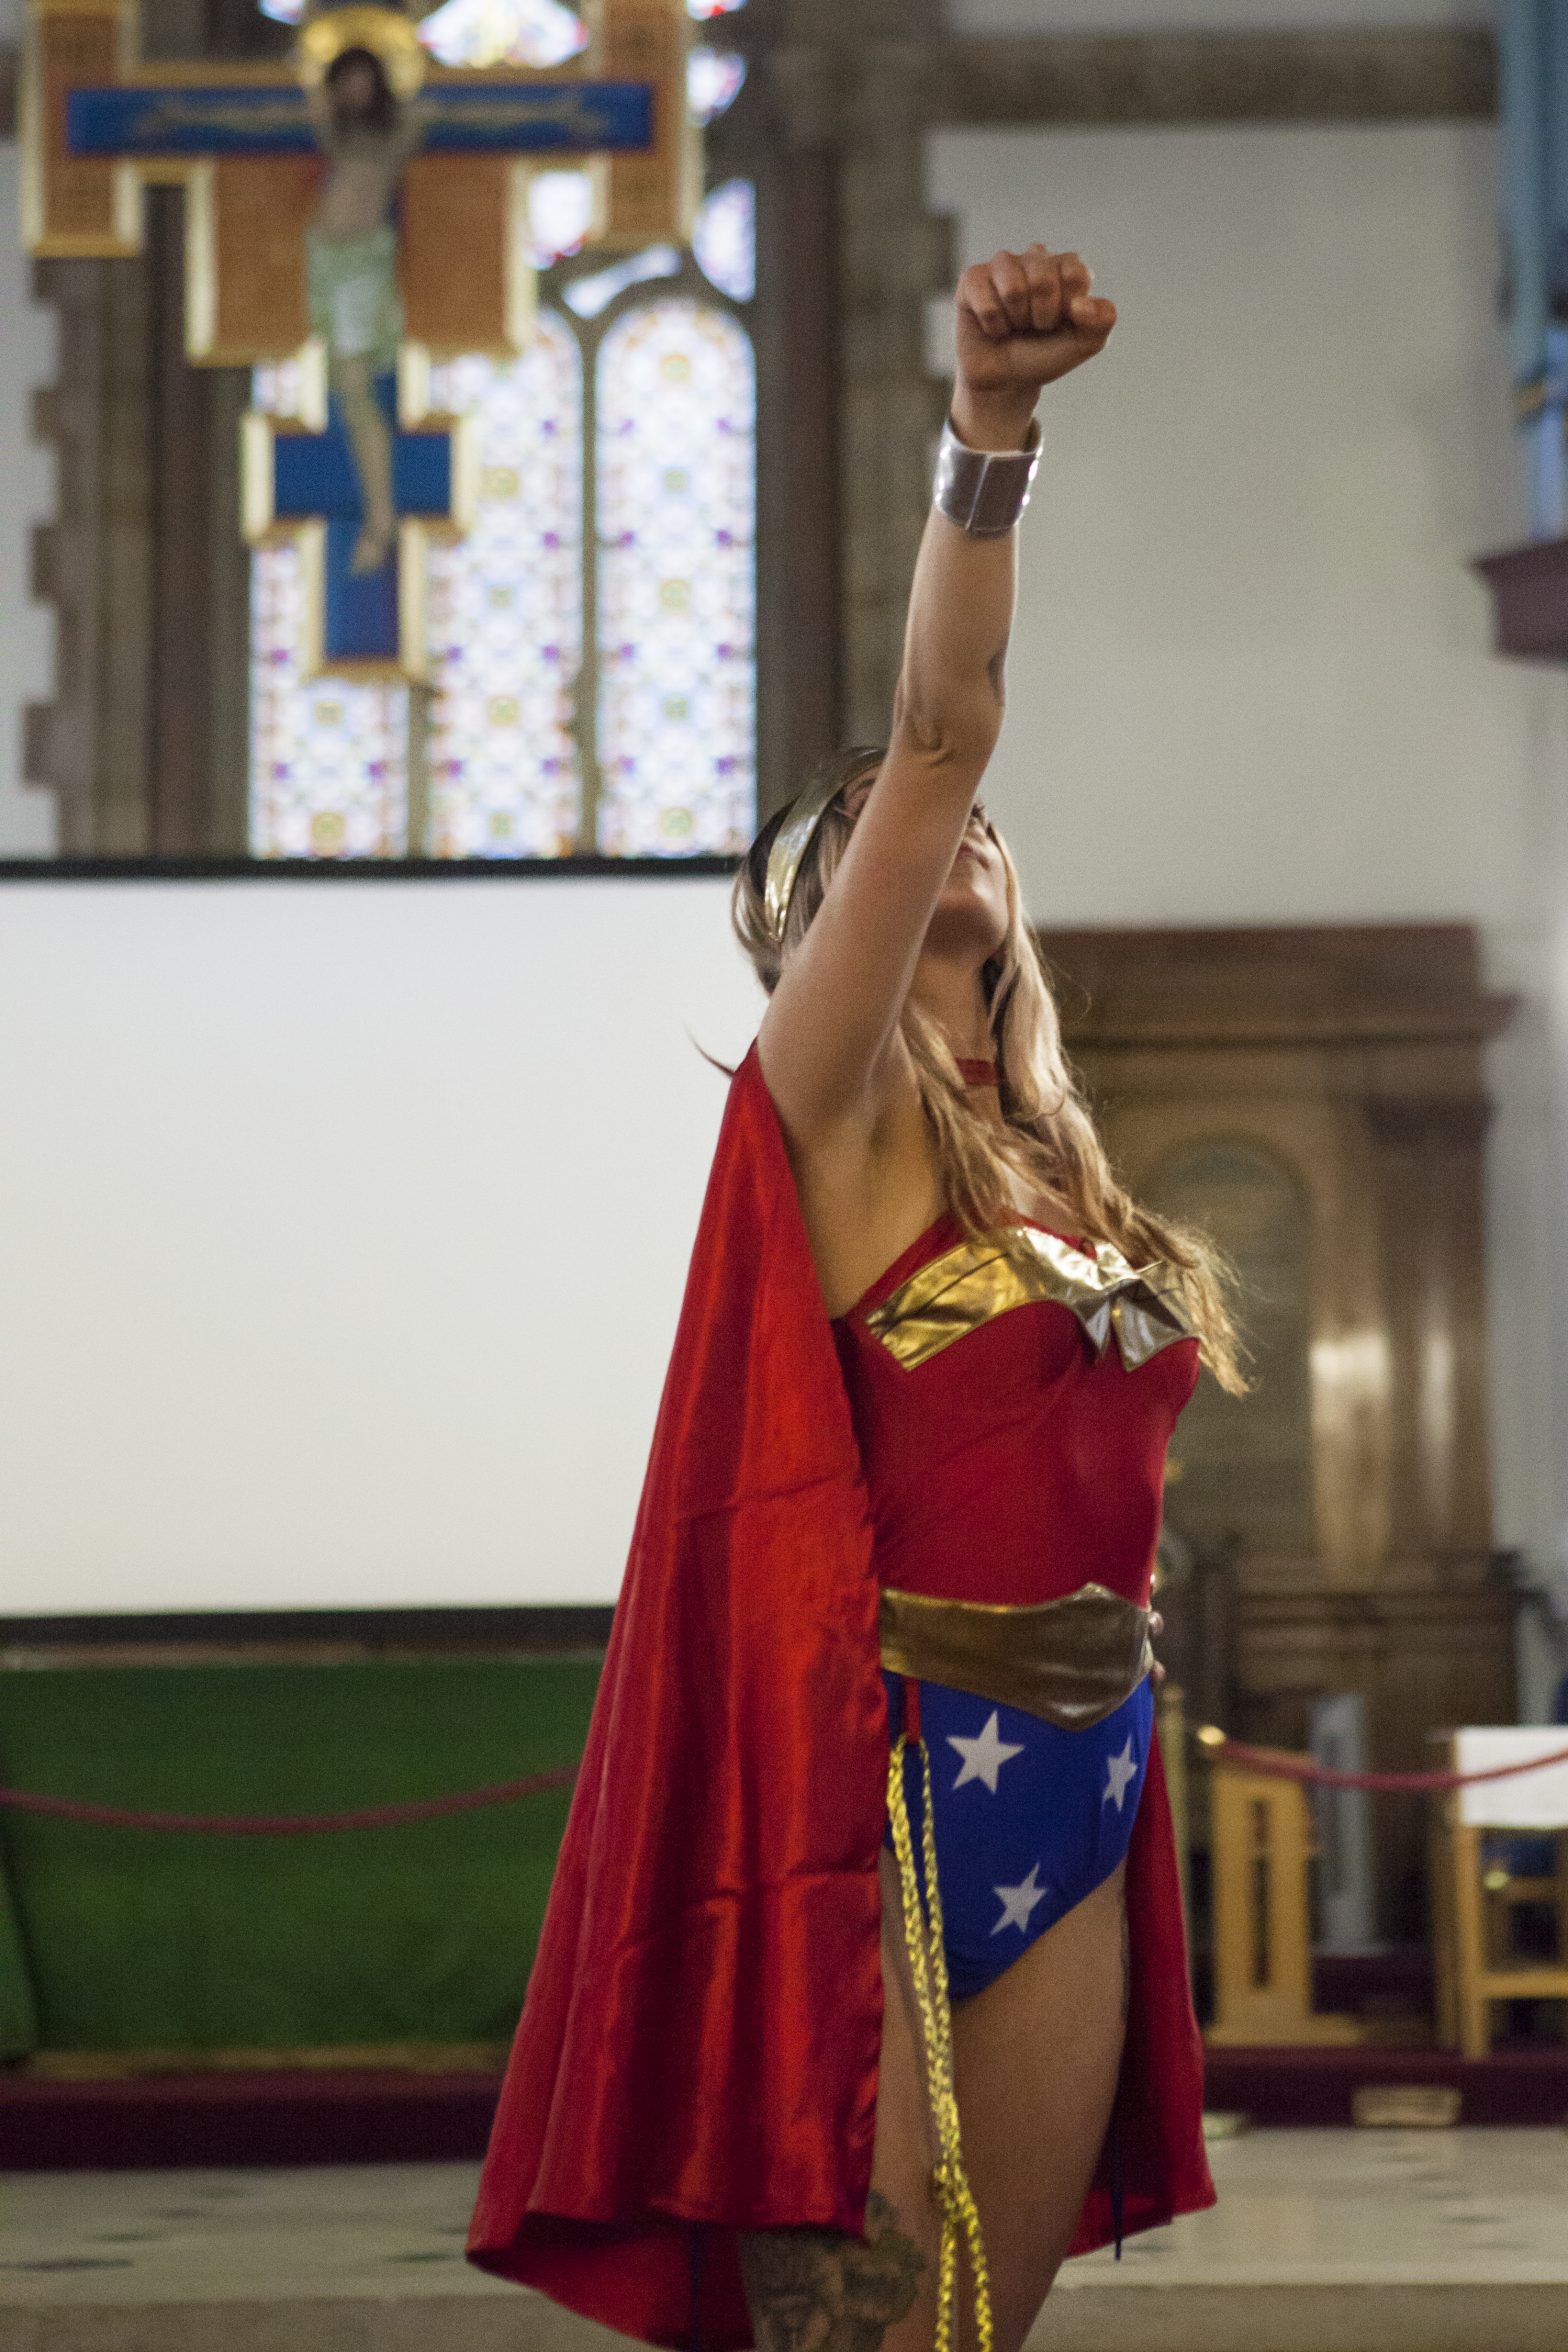 A woman is dressed as a superhero. Her arm is raised above her head.